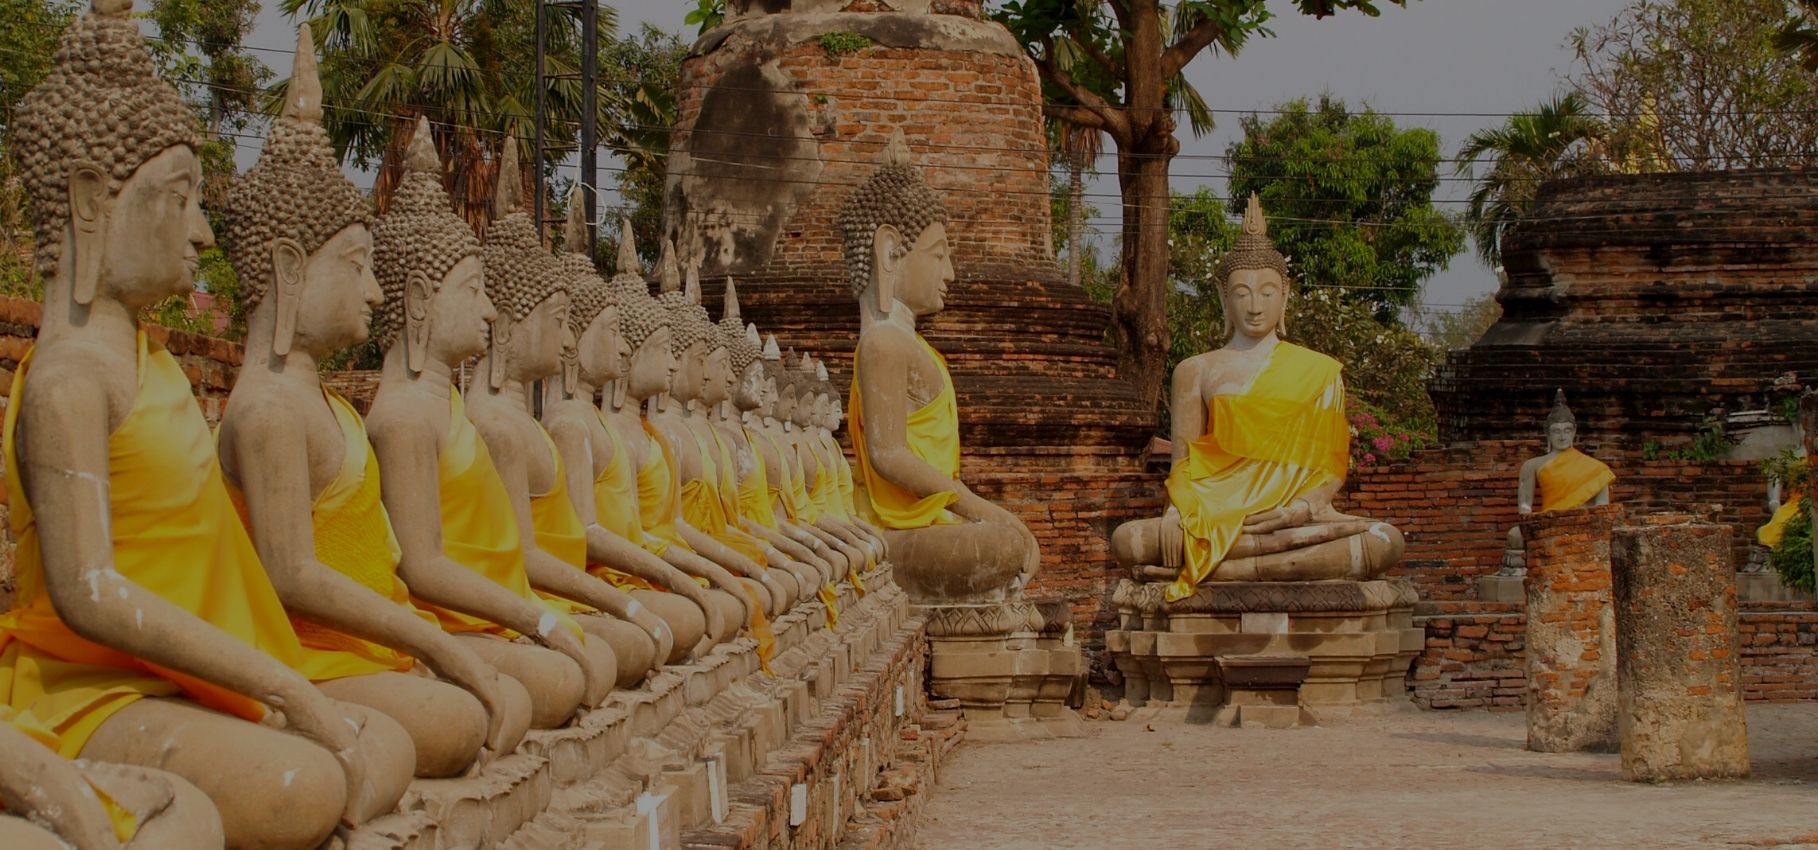 Places to visit in Ayutthaya, Thailand